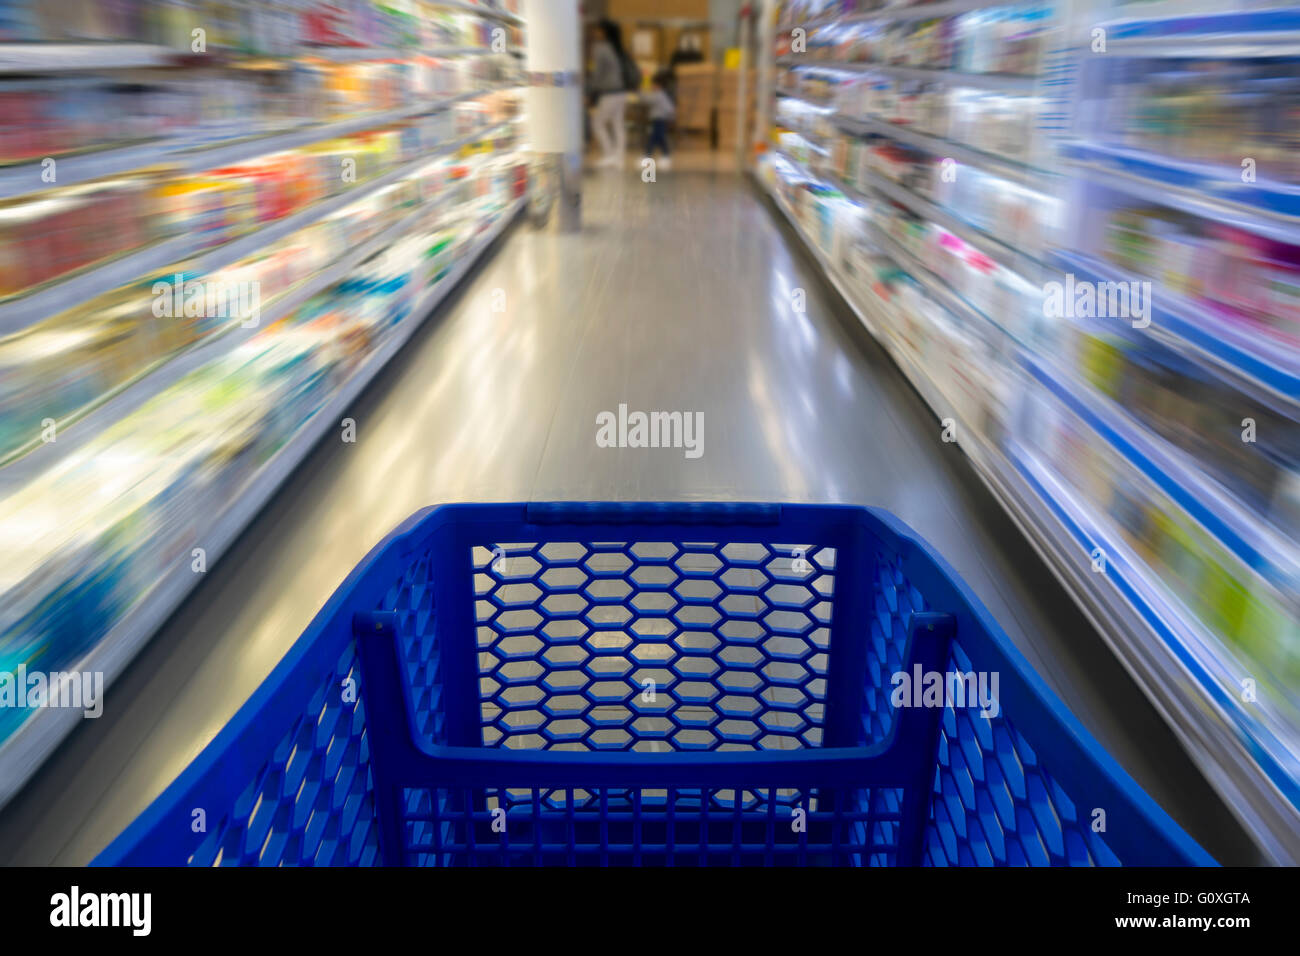 Shopping cart in a supermarket, with blurred shelves in the background Stock Photo